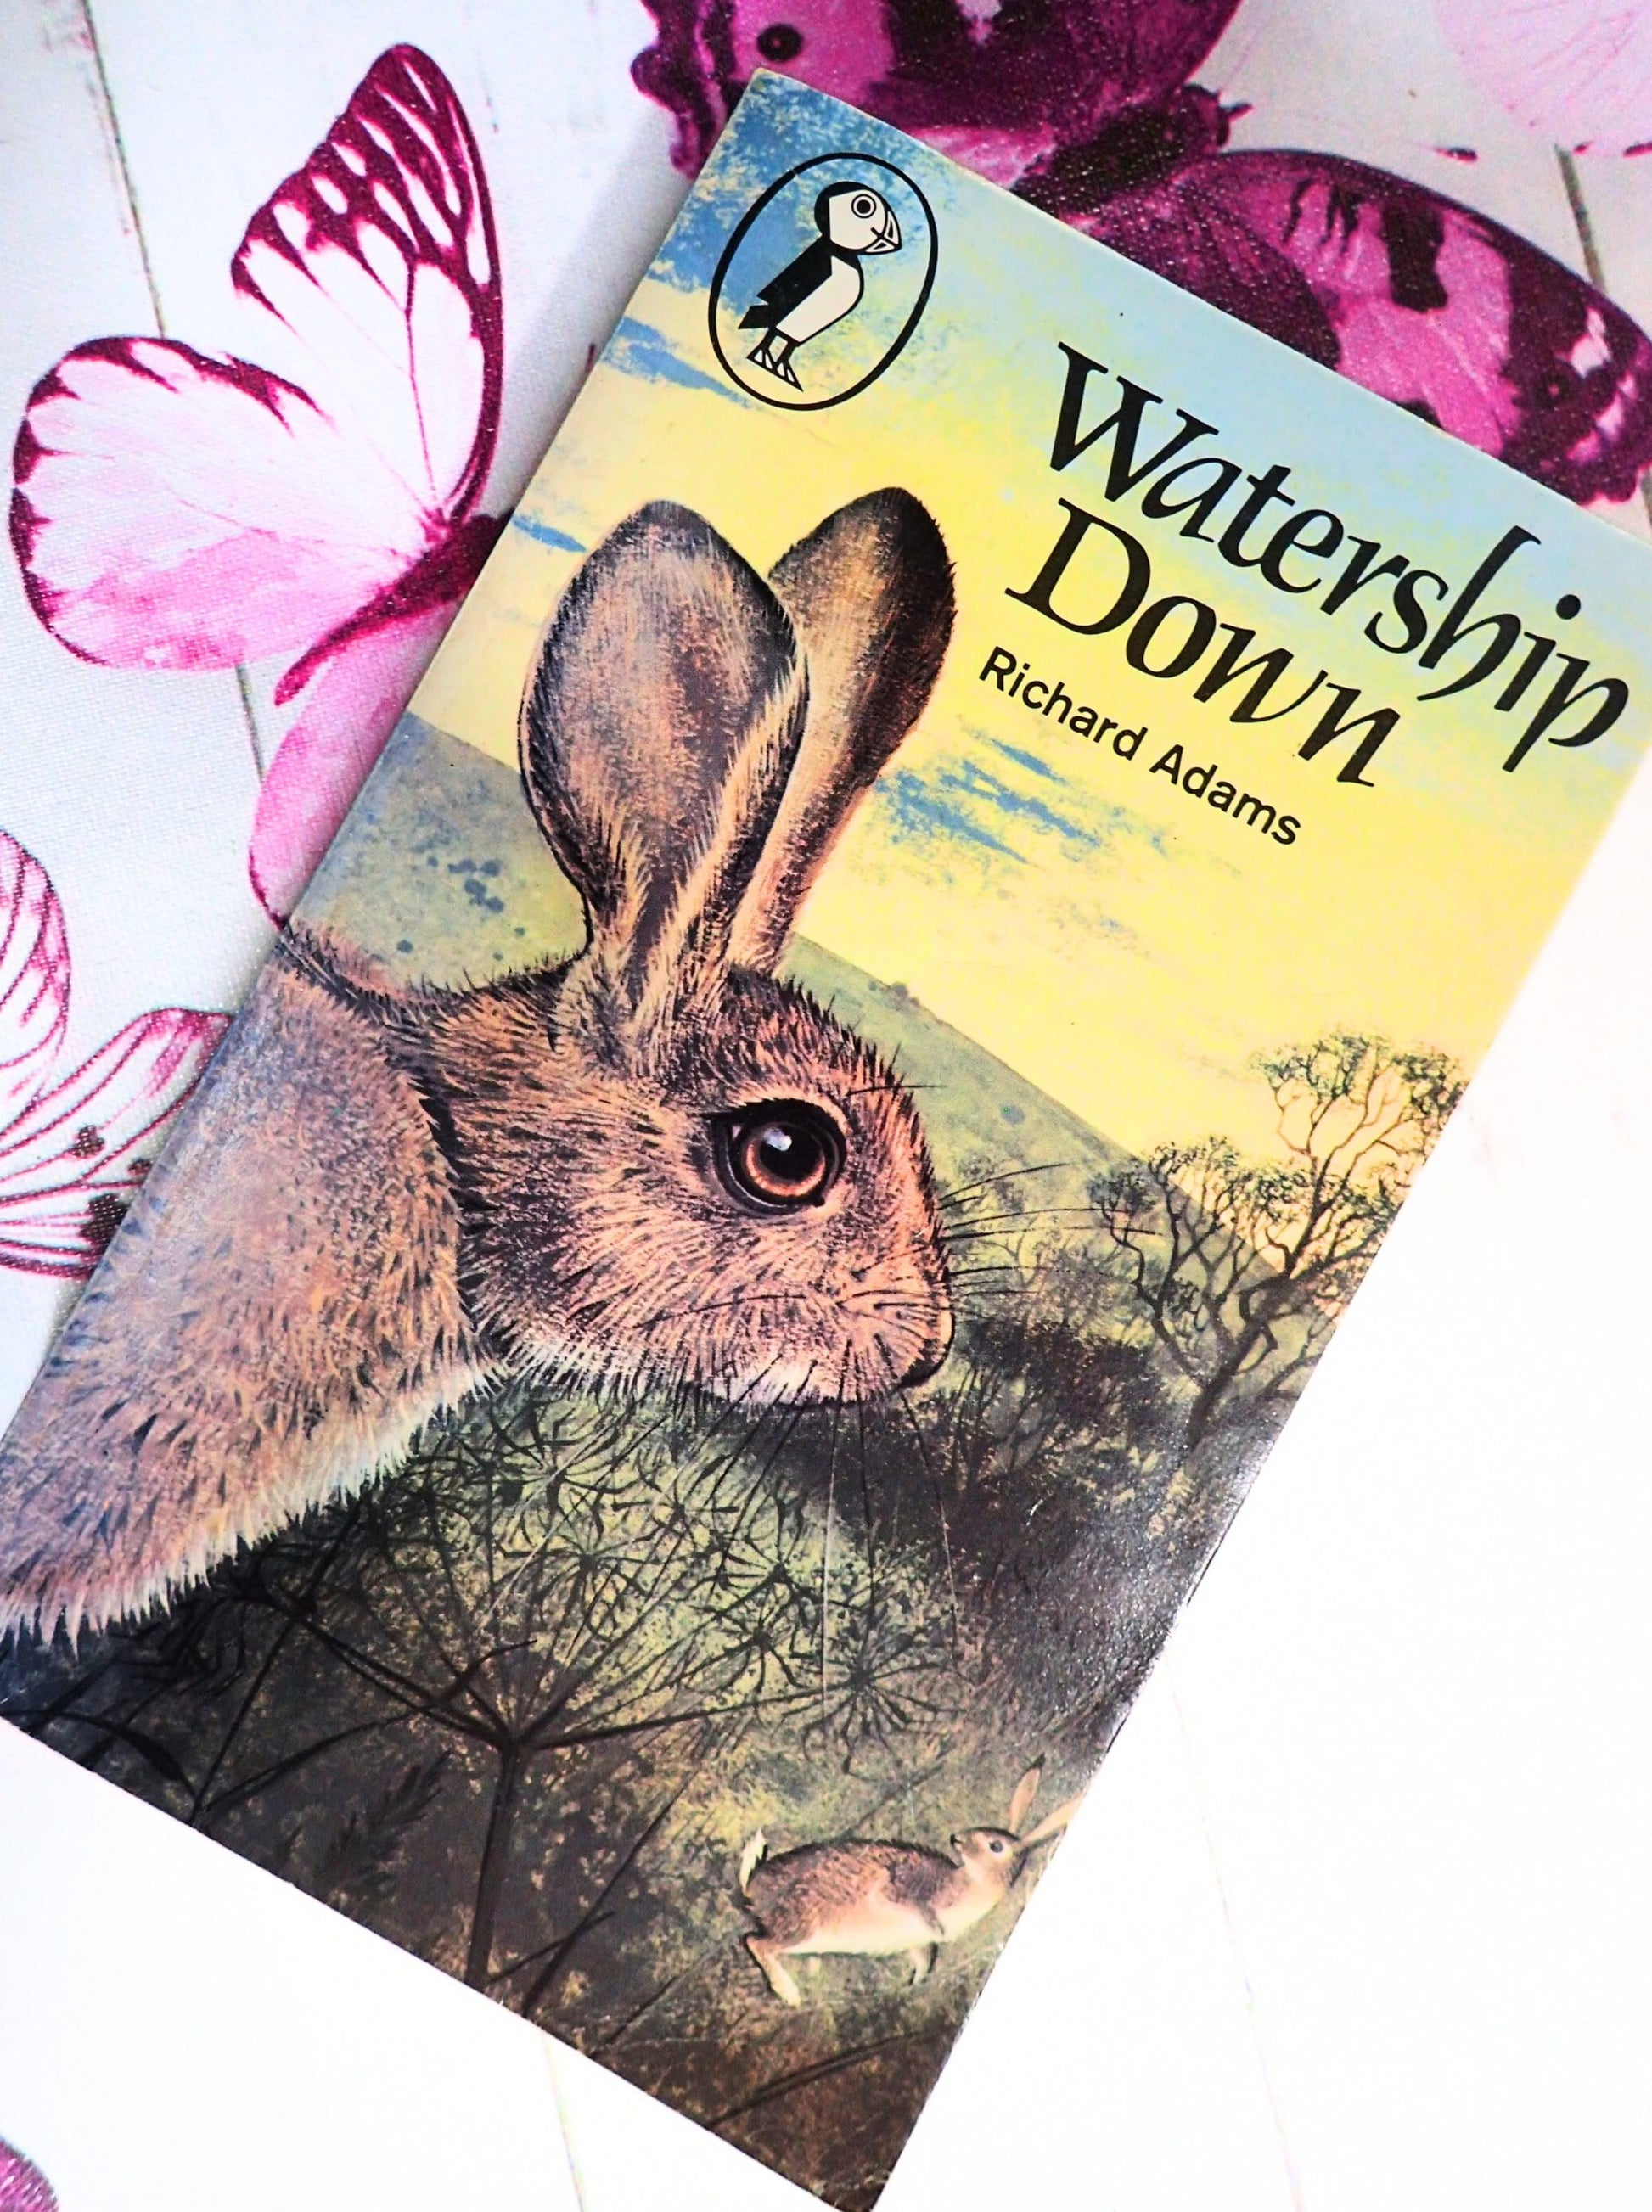 Front Cover of Watership Down by Richard Adams 1970's Pauline Baynes Illustration